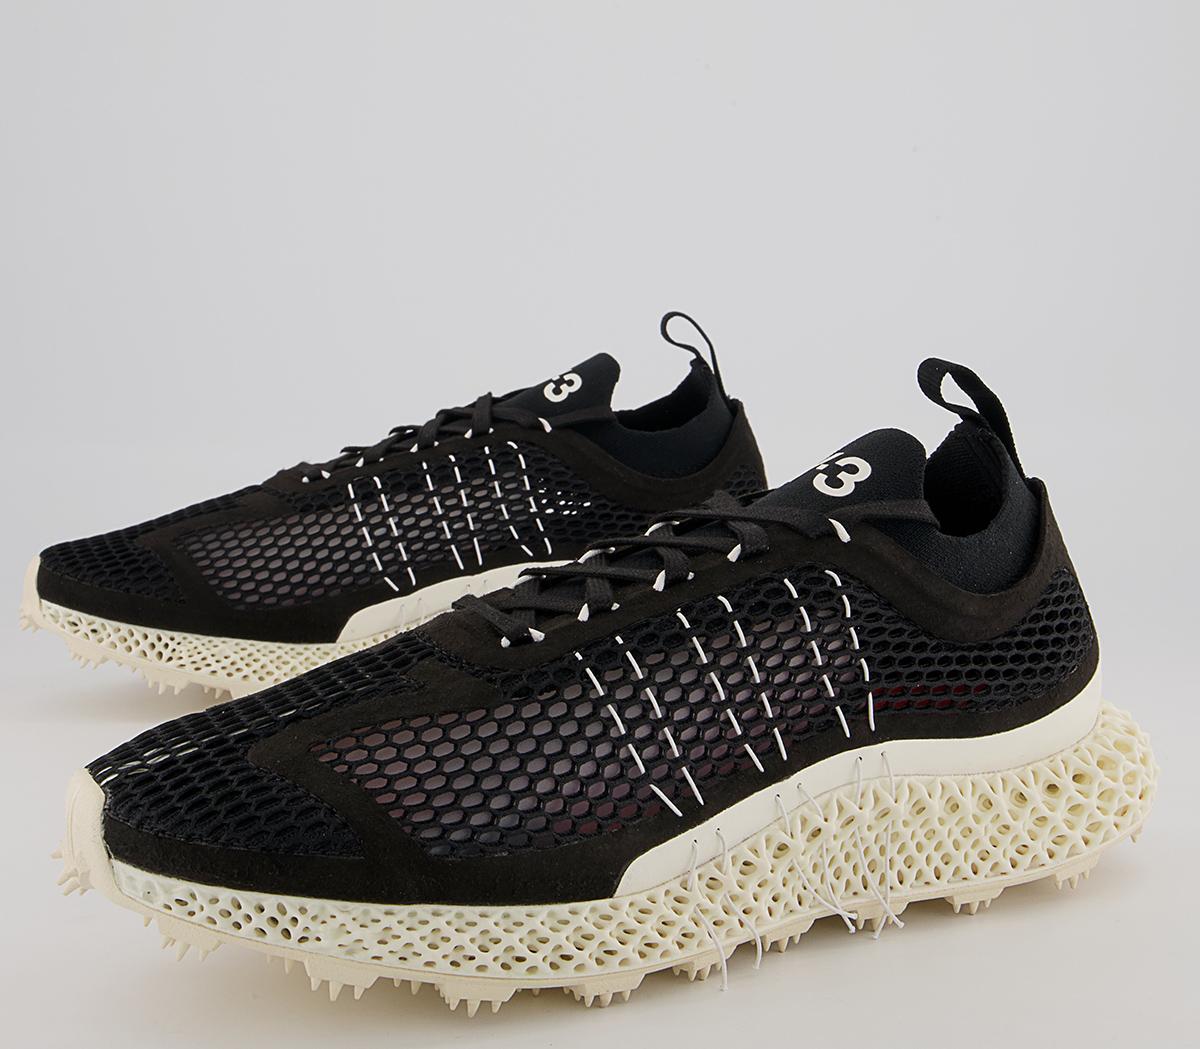 adidas Y-3 Y-3 Runner 4d Halo Trainers Black Core White Red - Men's ...